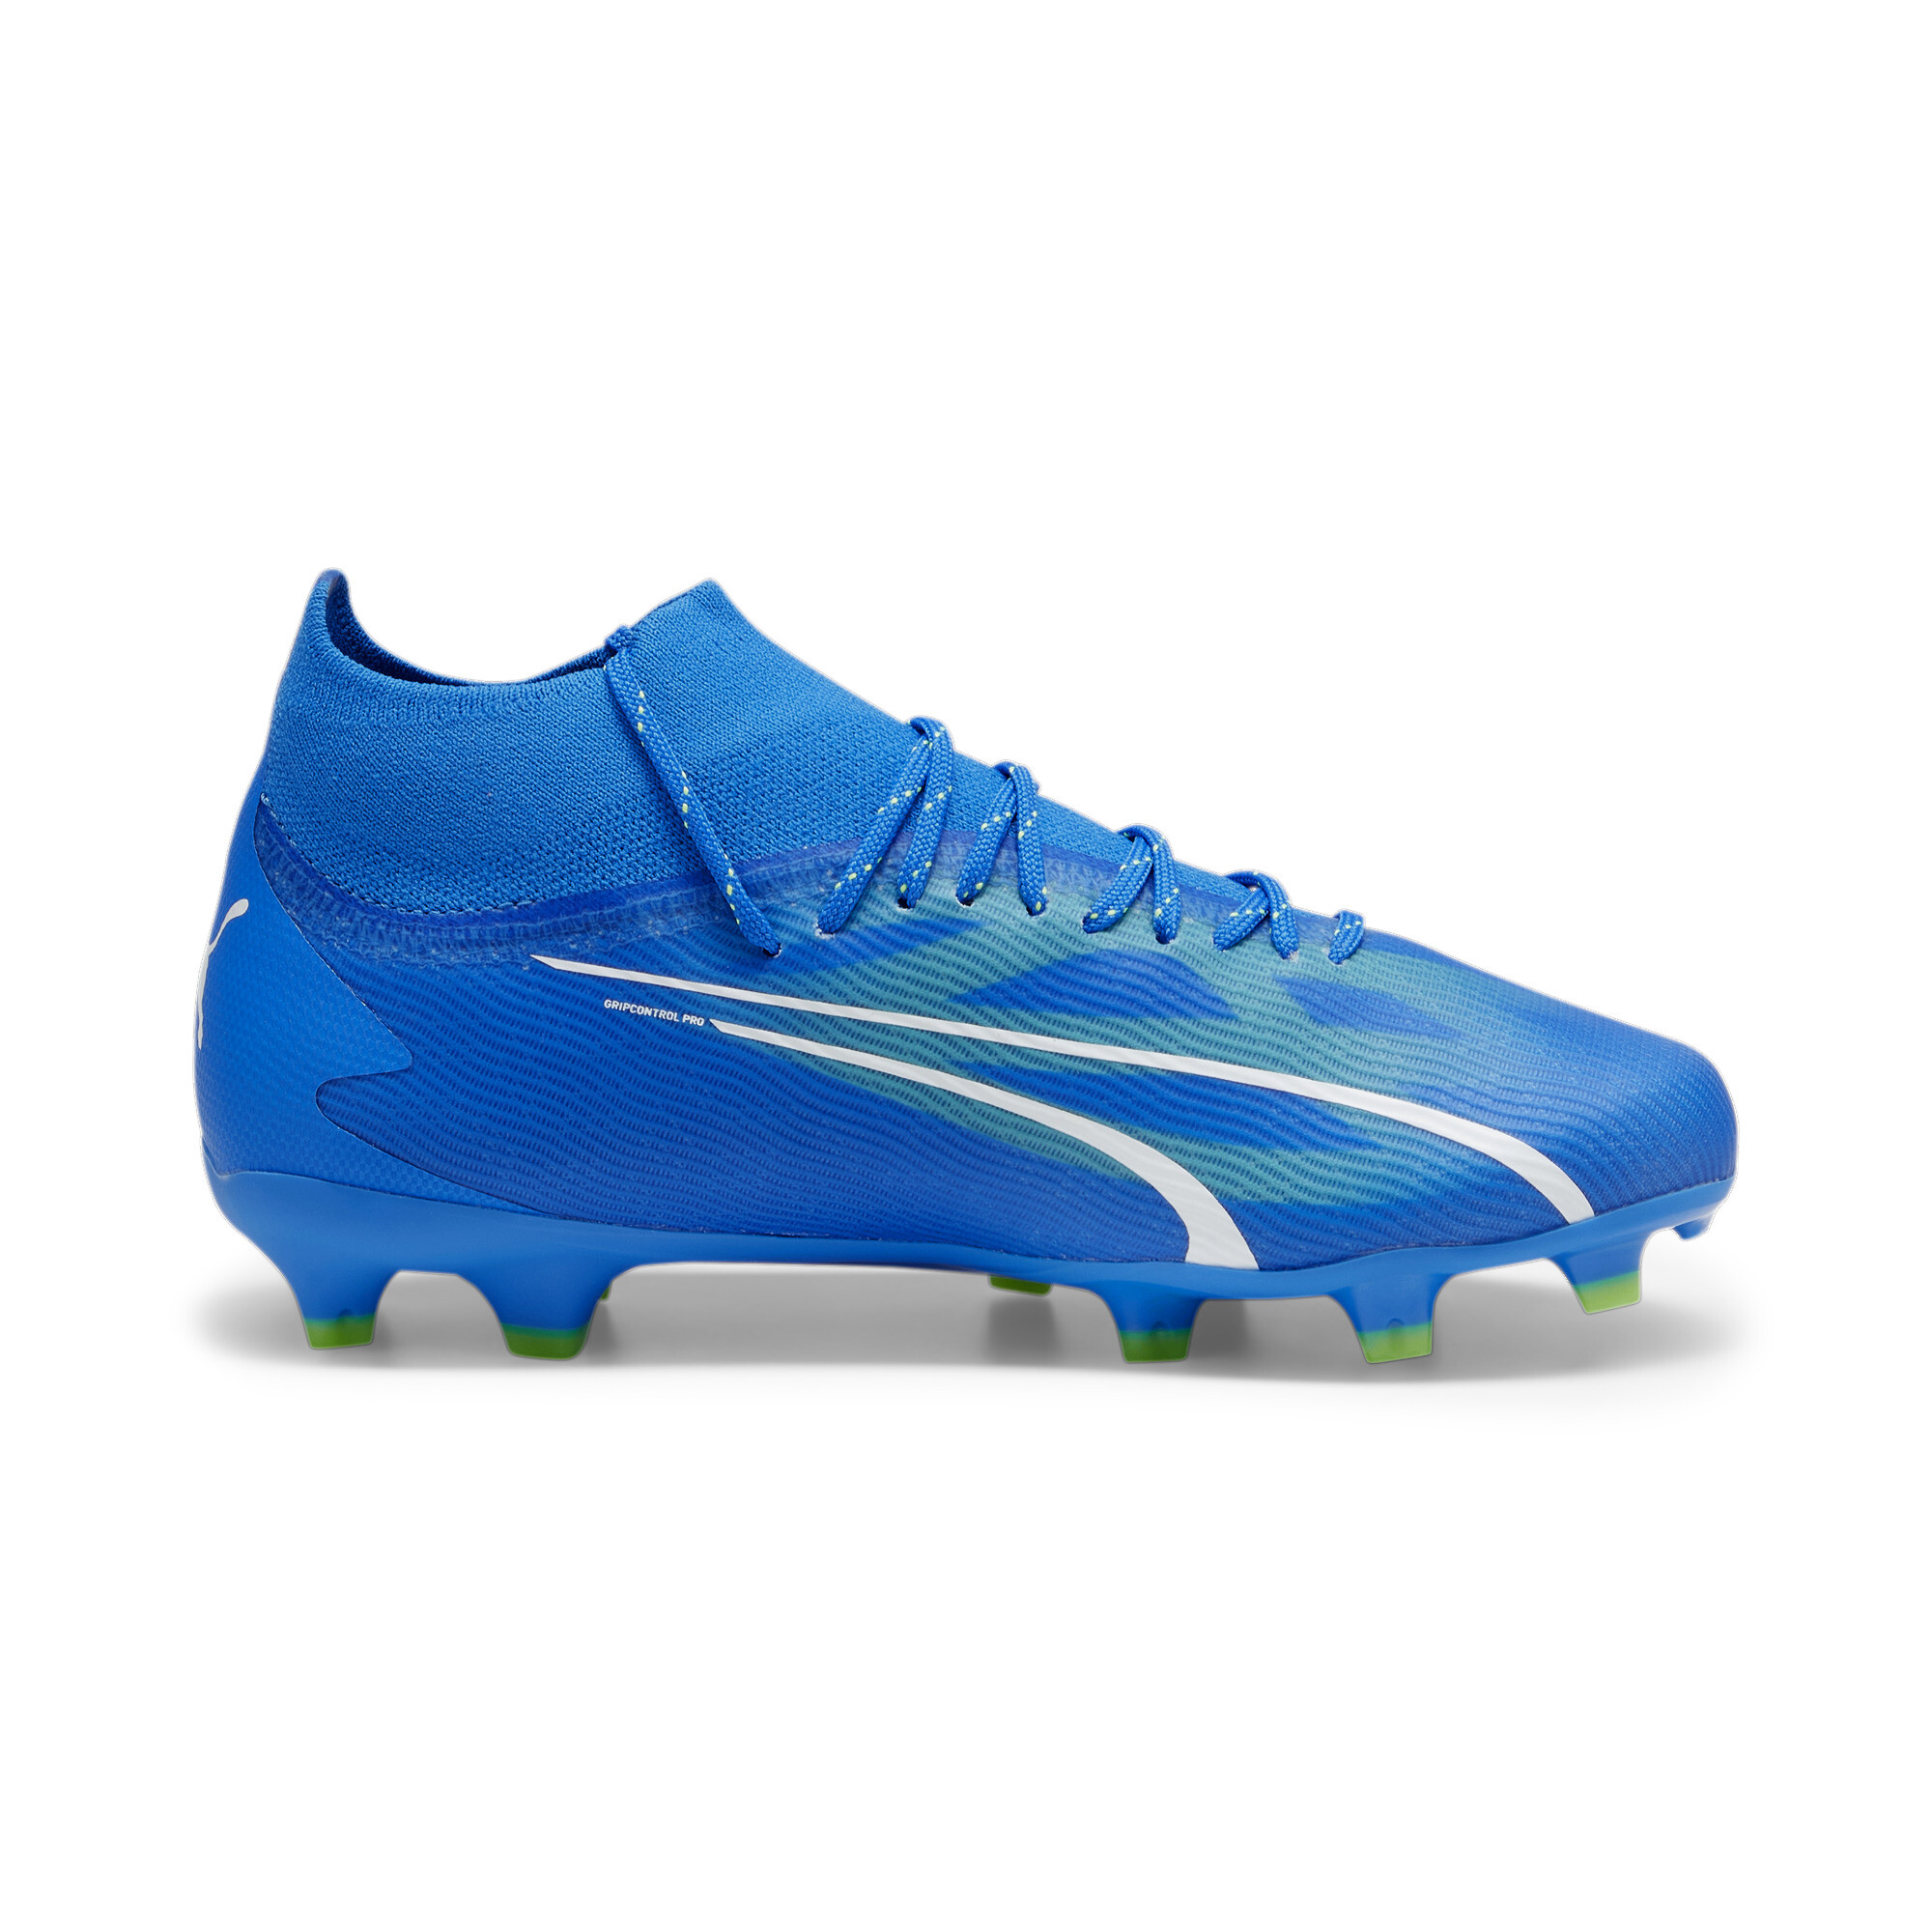 Puma ULTRA PRO FG/AG Youth Football Boots, Blue, Size 37.5, Shoes